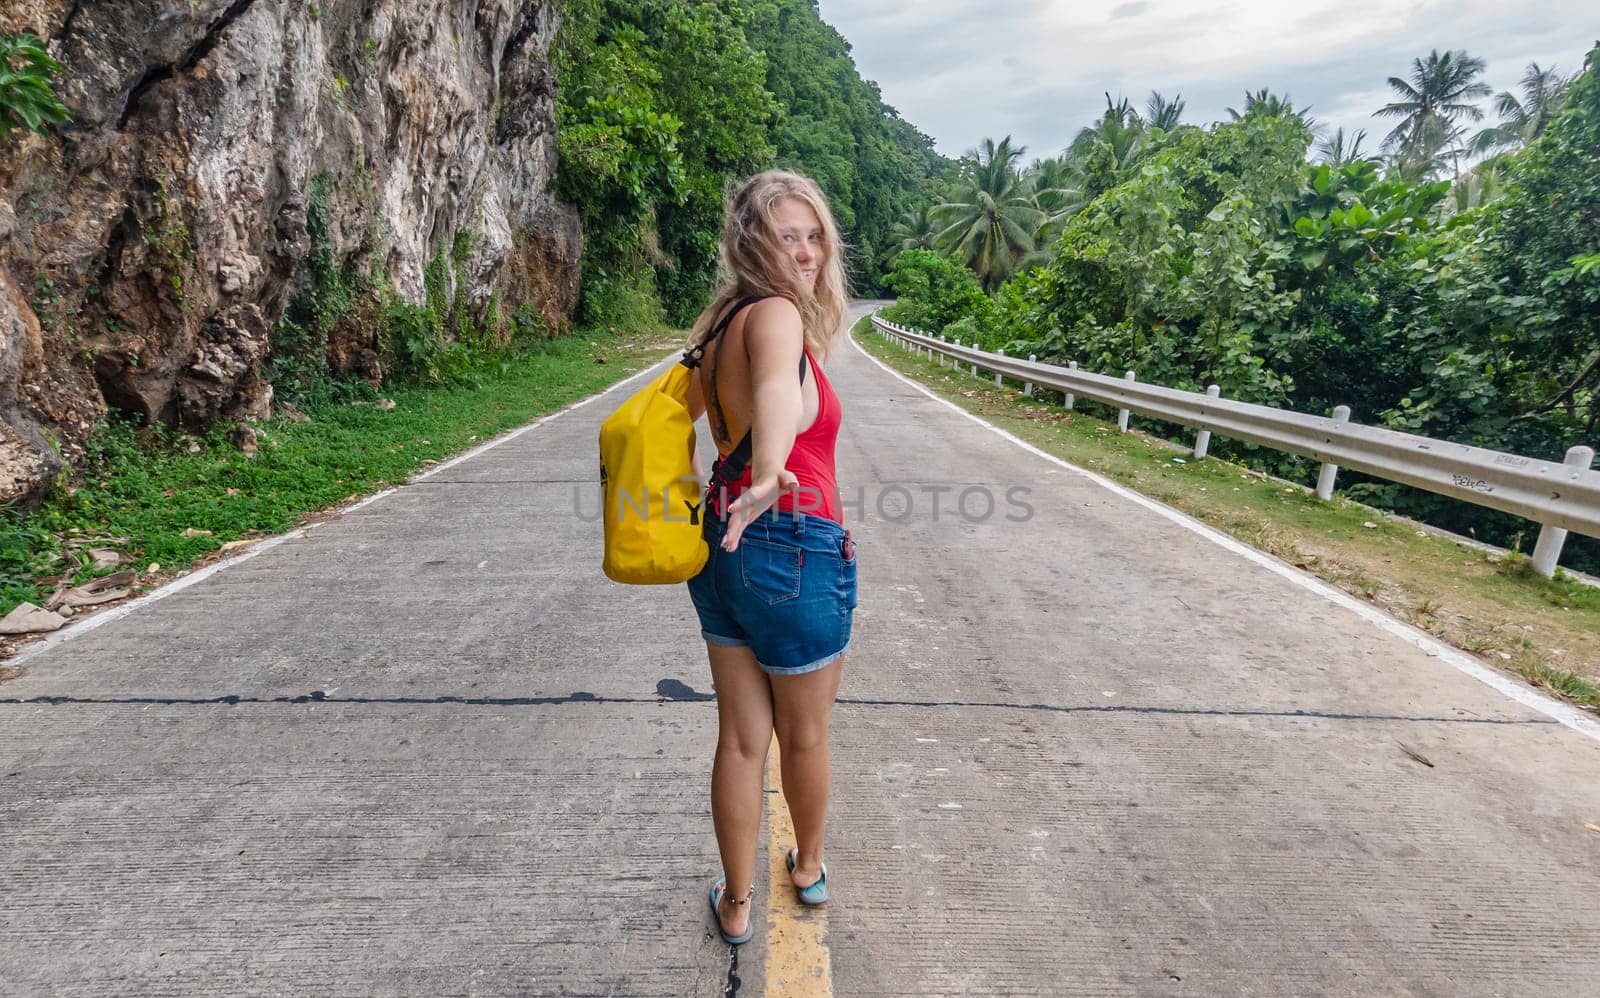 A young woman with a yellow backpack appears to be inviting the viewer to join her as she explores a deserted road lined with dense, green foliage and towering cliffs. by Busker